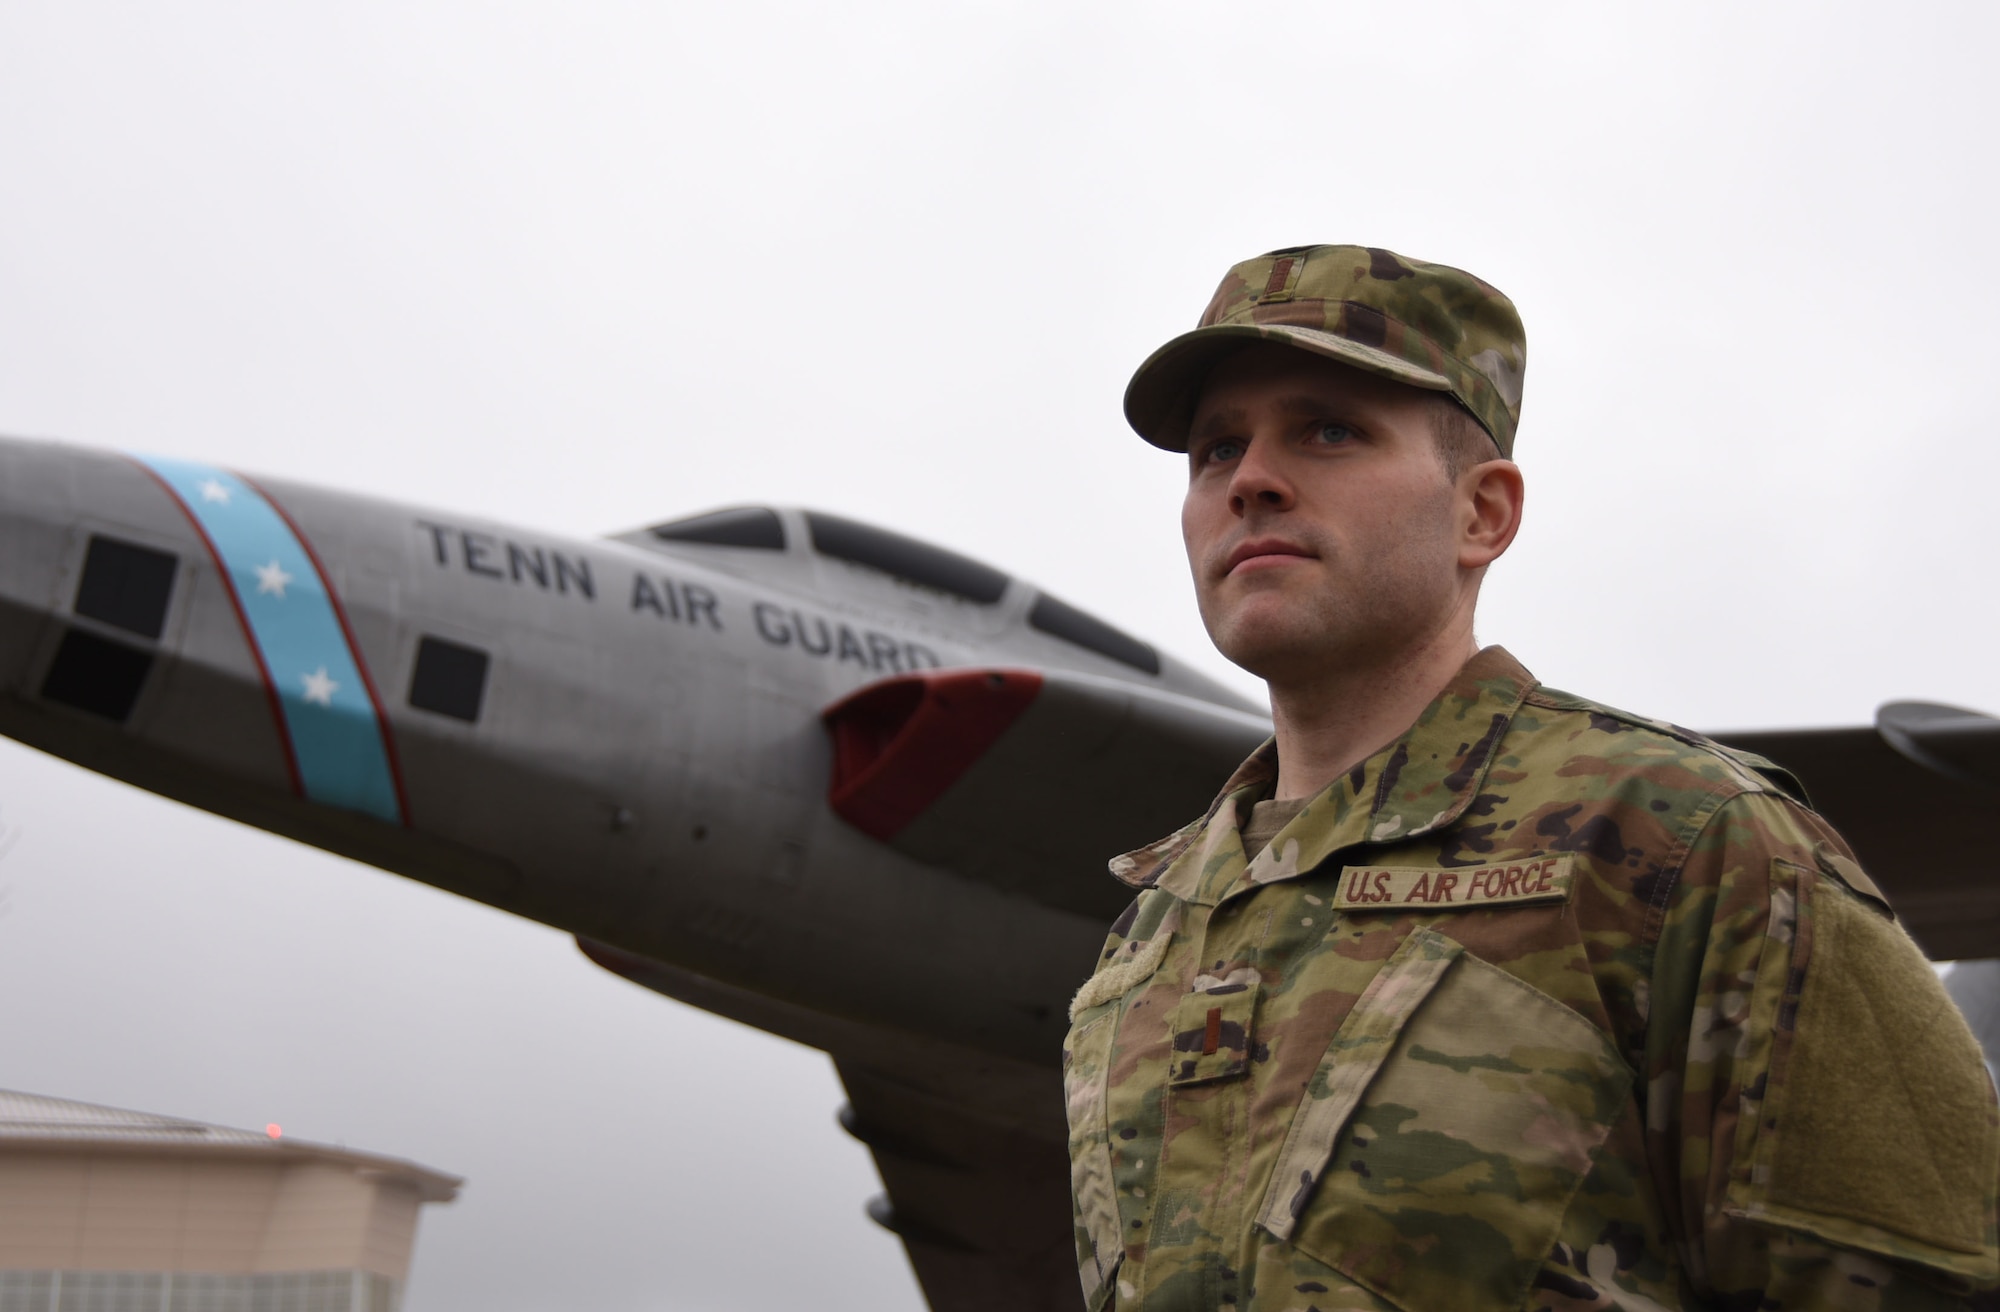 U.S. Air Force 2nd Lt. William, a flight commander at the 118th Wing, Tennessee Air National Guard, poses for a photo on January 13, 2019 at Berry Field Air National Guard base.